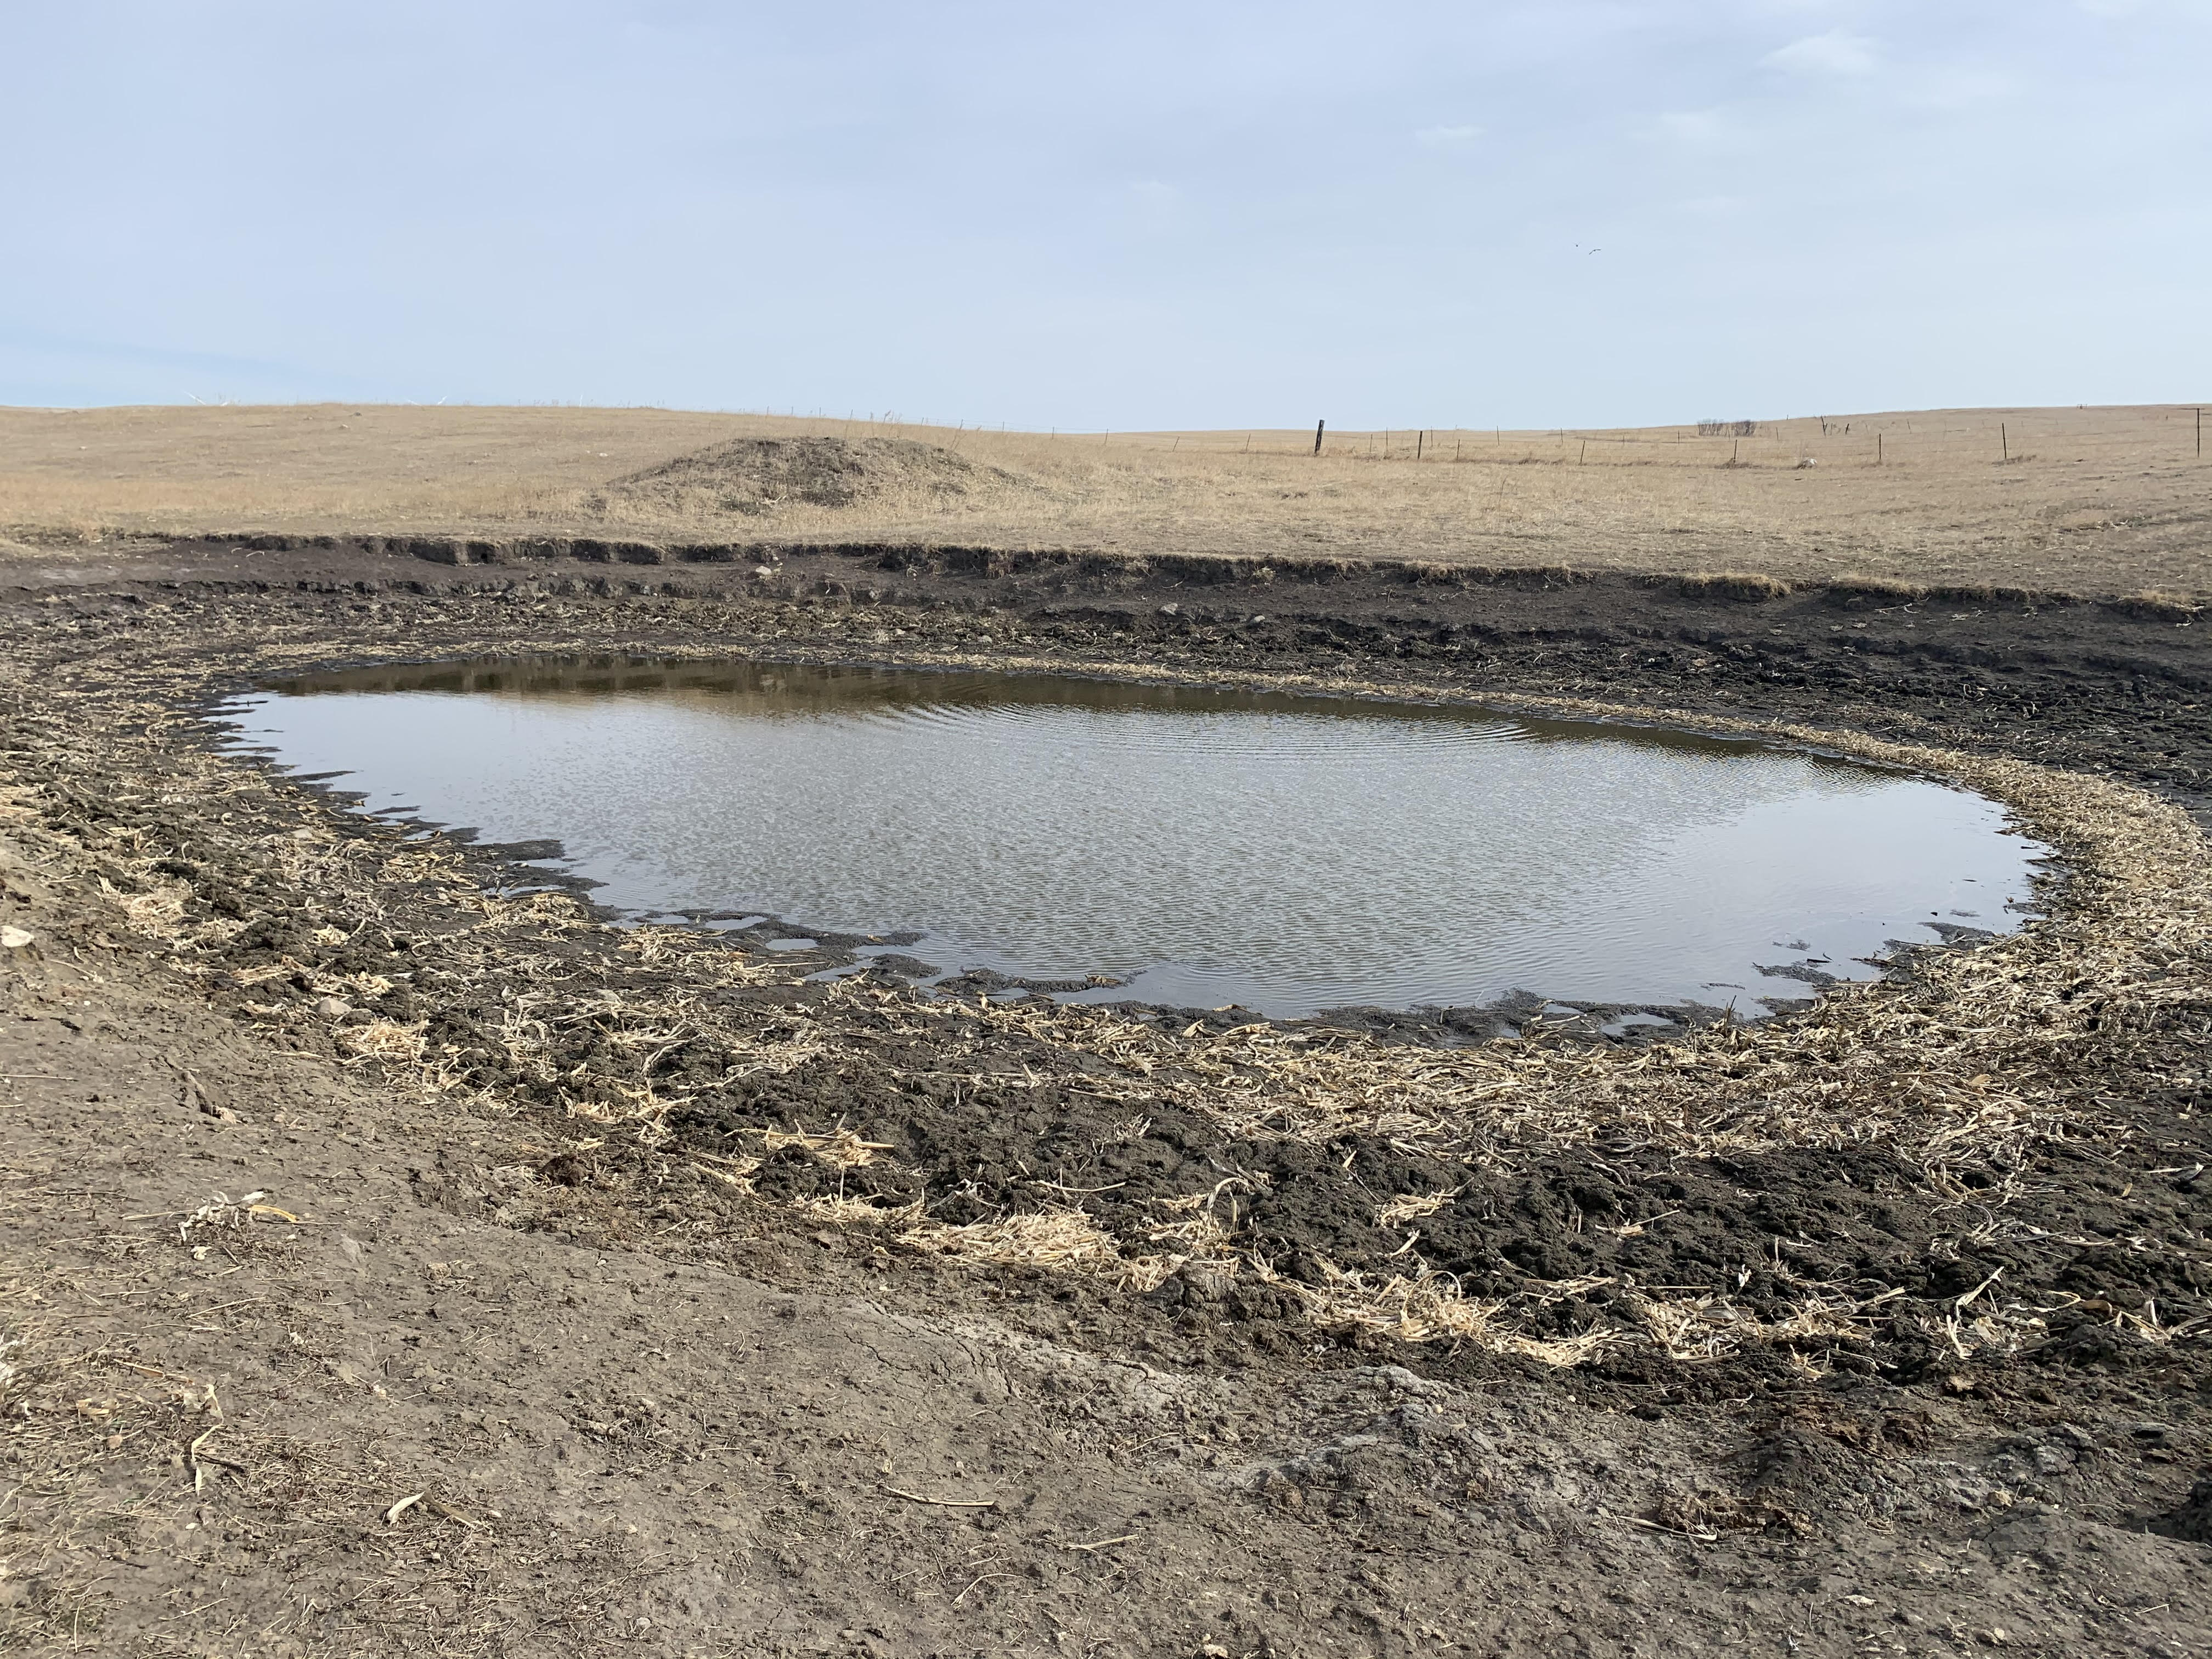 Morning Ag News, September 2, 2021: Friday is the deadline to submit comments on WOTUS rewrite